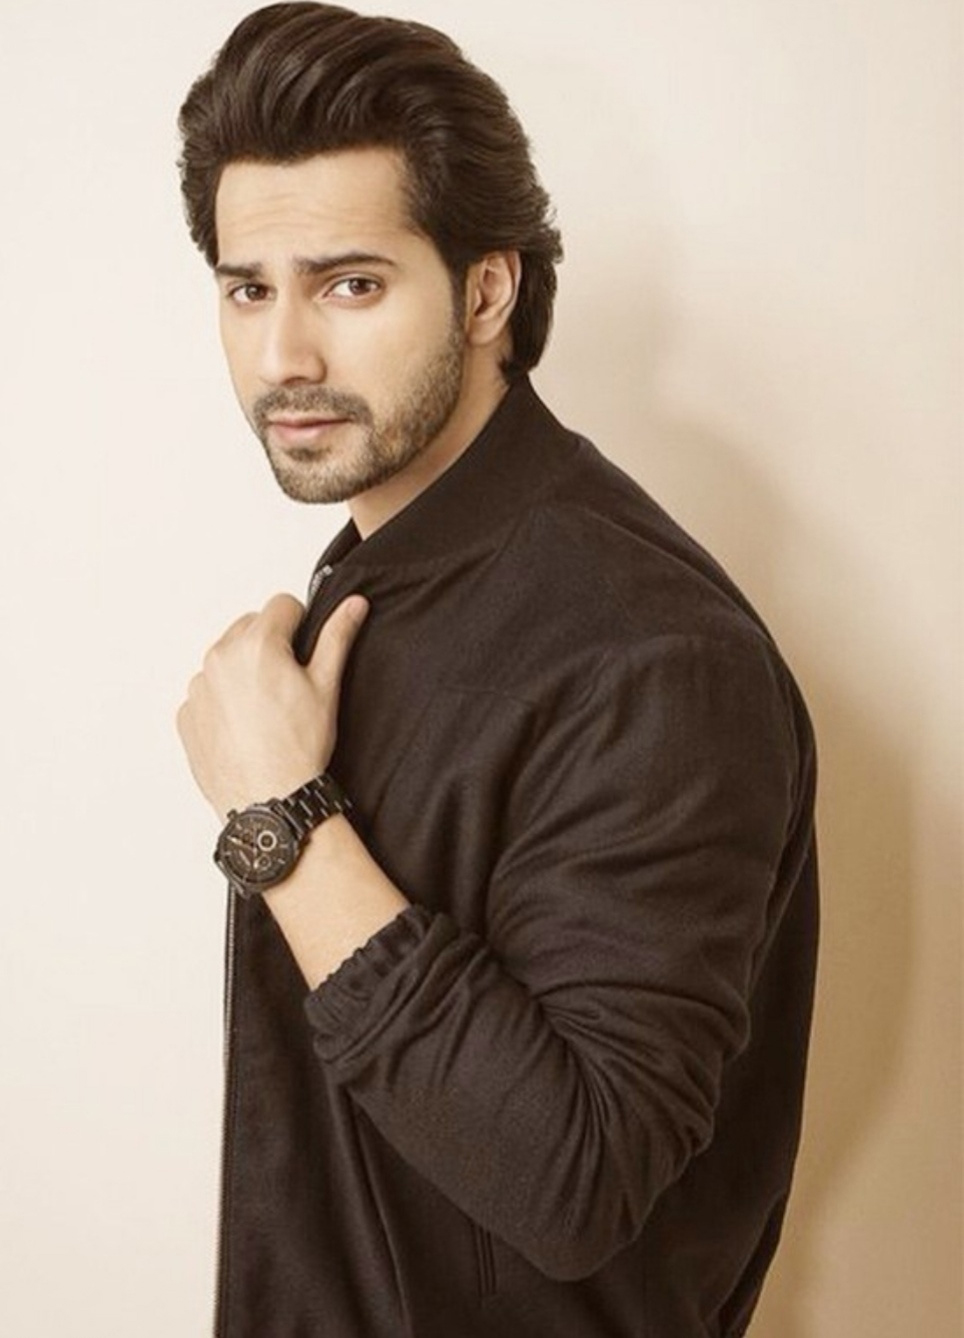 Varun Dhawan Wife Age Biography Wiki Father Net Worth 2021 In an interview, varun revealed that his grandfather used to work at the hsbc bank in hongkong. varun dhawan wife age biography wiki